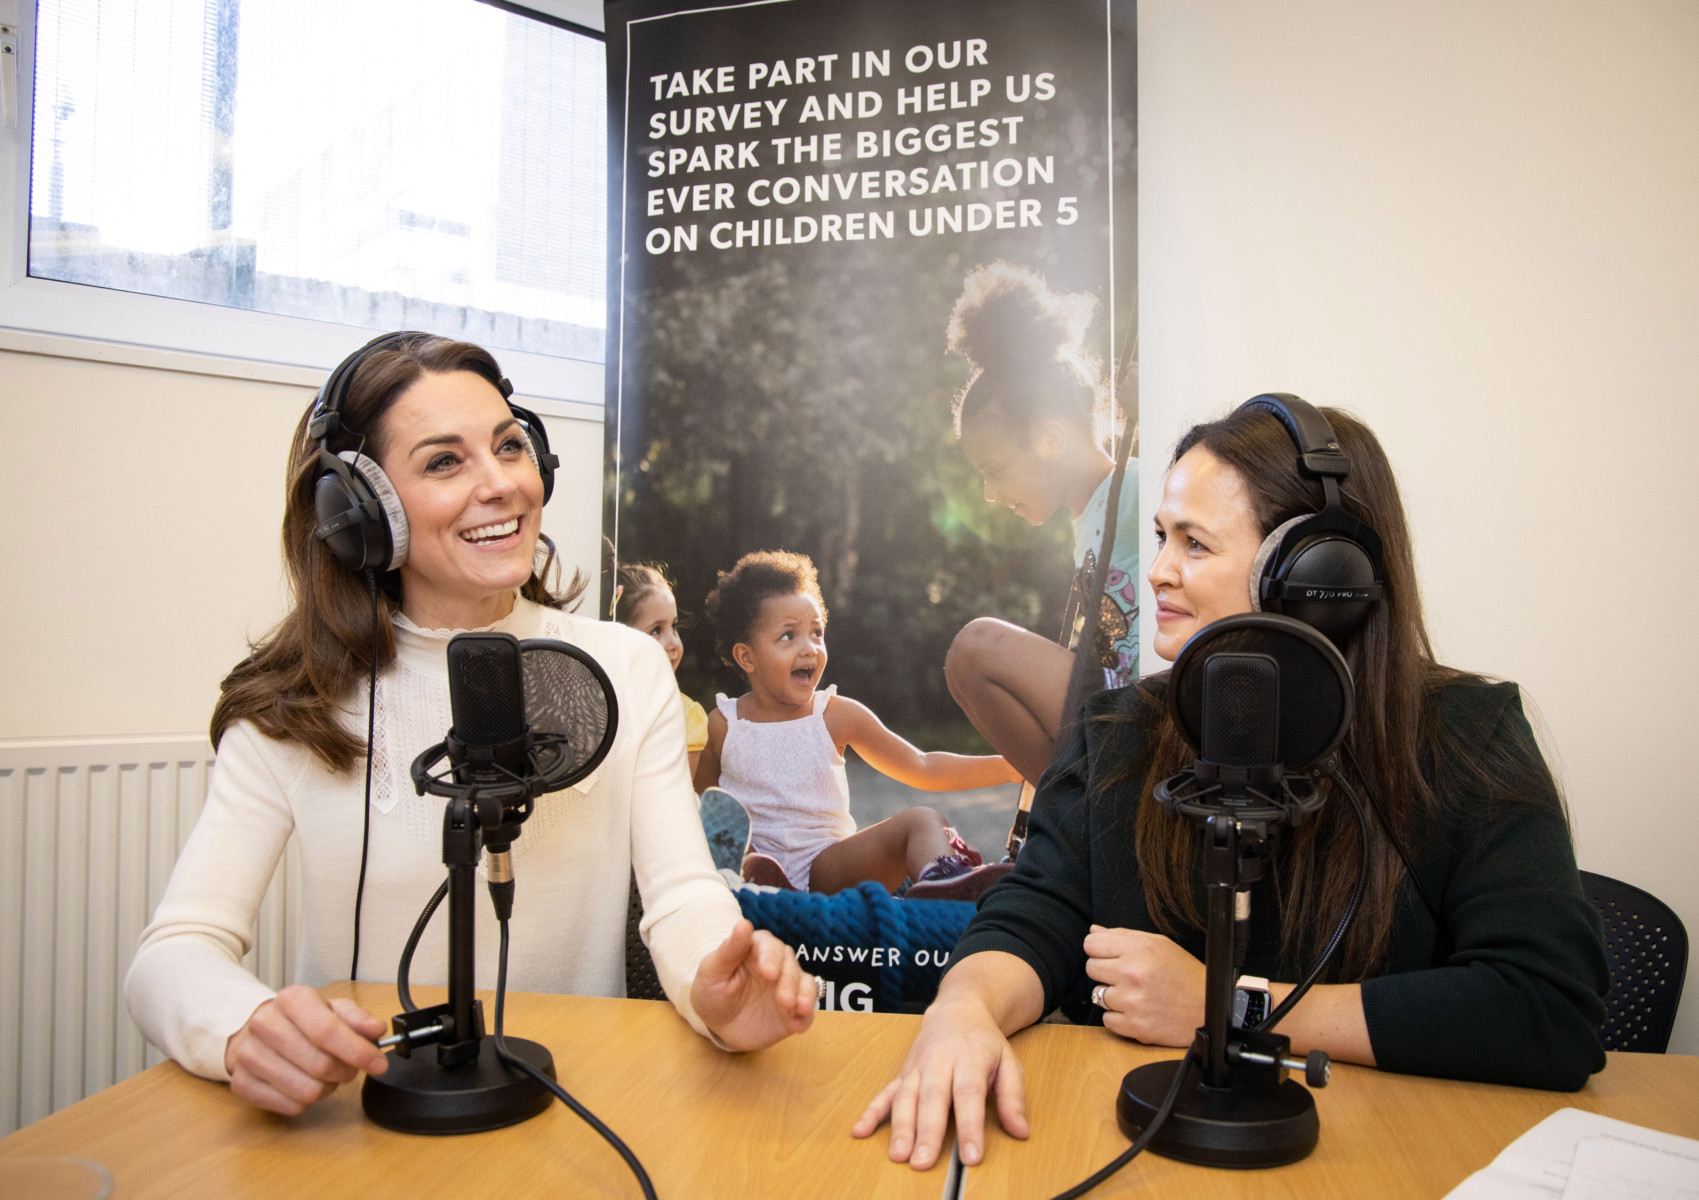 Kate Middleton told podcaster Giovanna Fletcher about her childhood to promote her 5 Big Questions for the Under Fives online survey